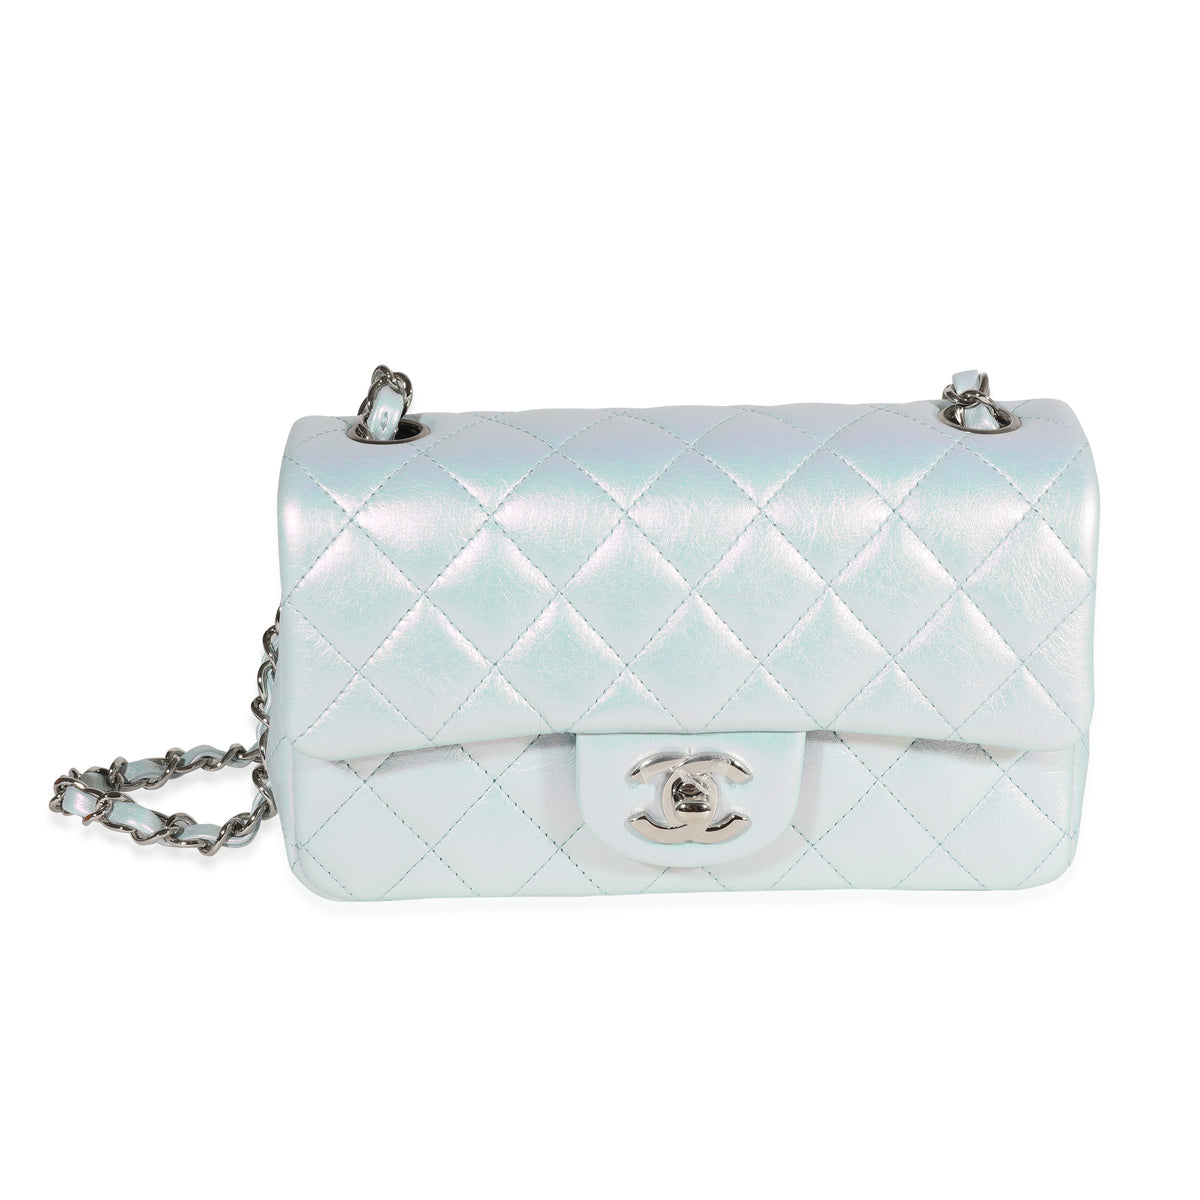 Chanel Light Blue Iridescent Quilted Calfskin Square Mini Classic Flap Bag, myGemma, IT